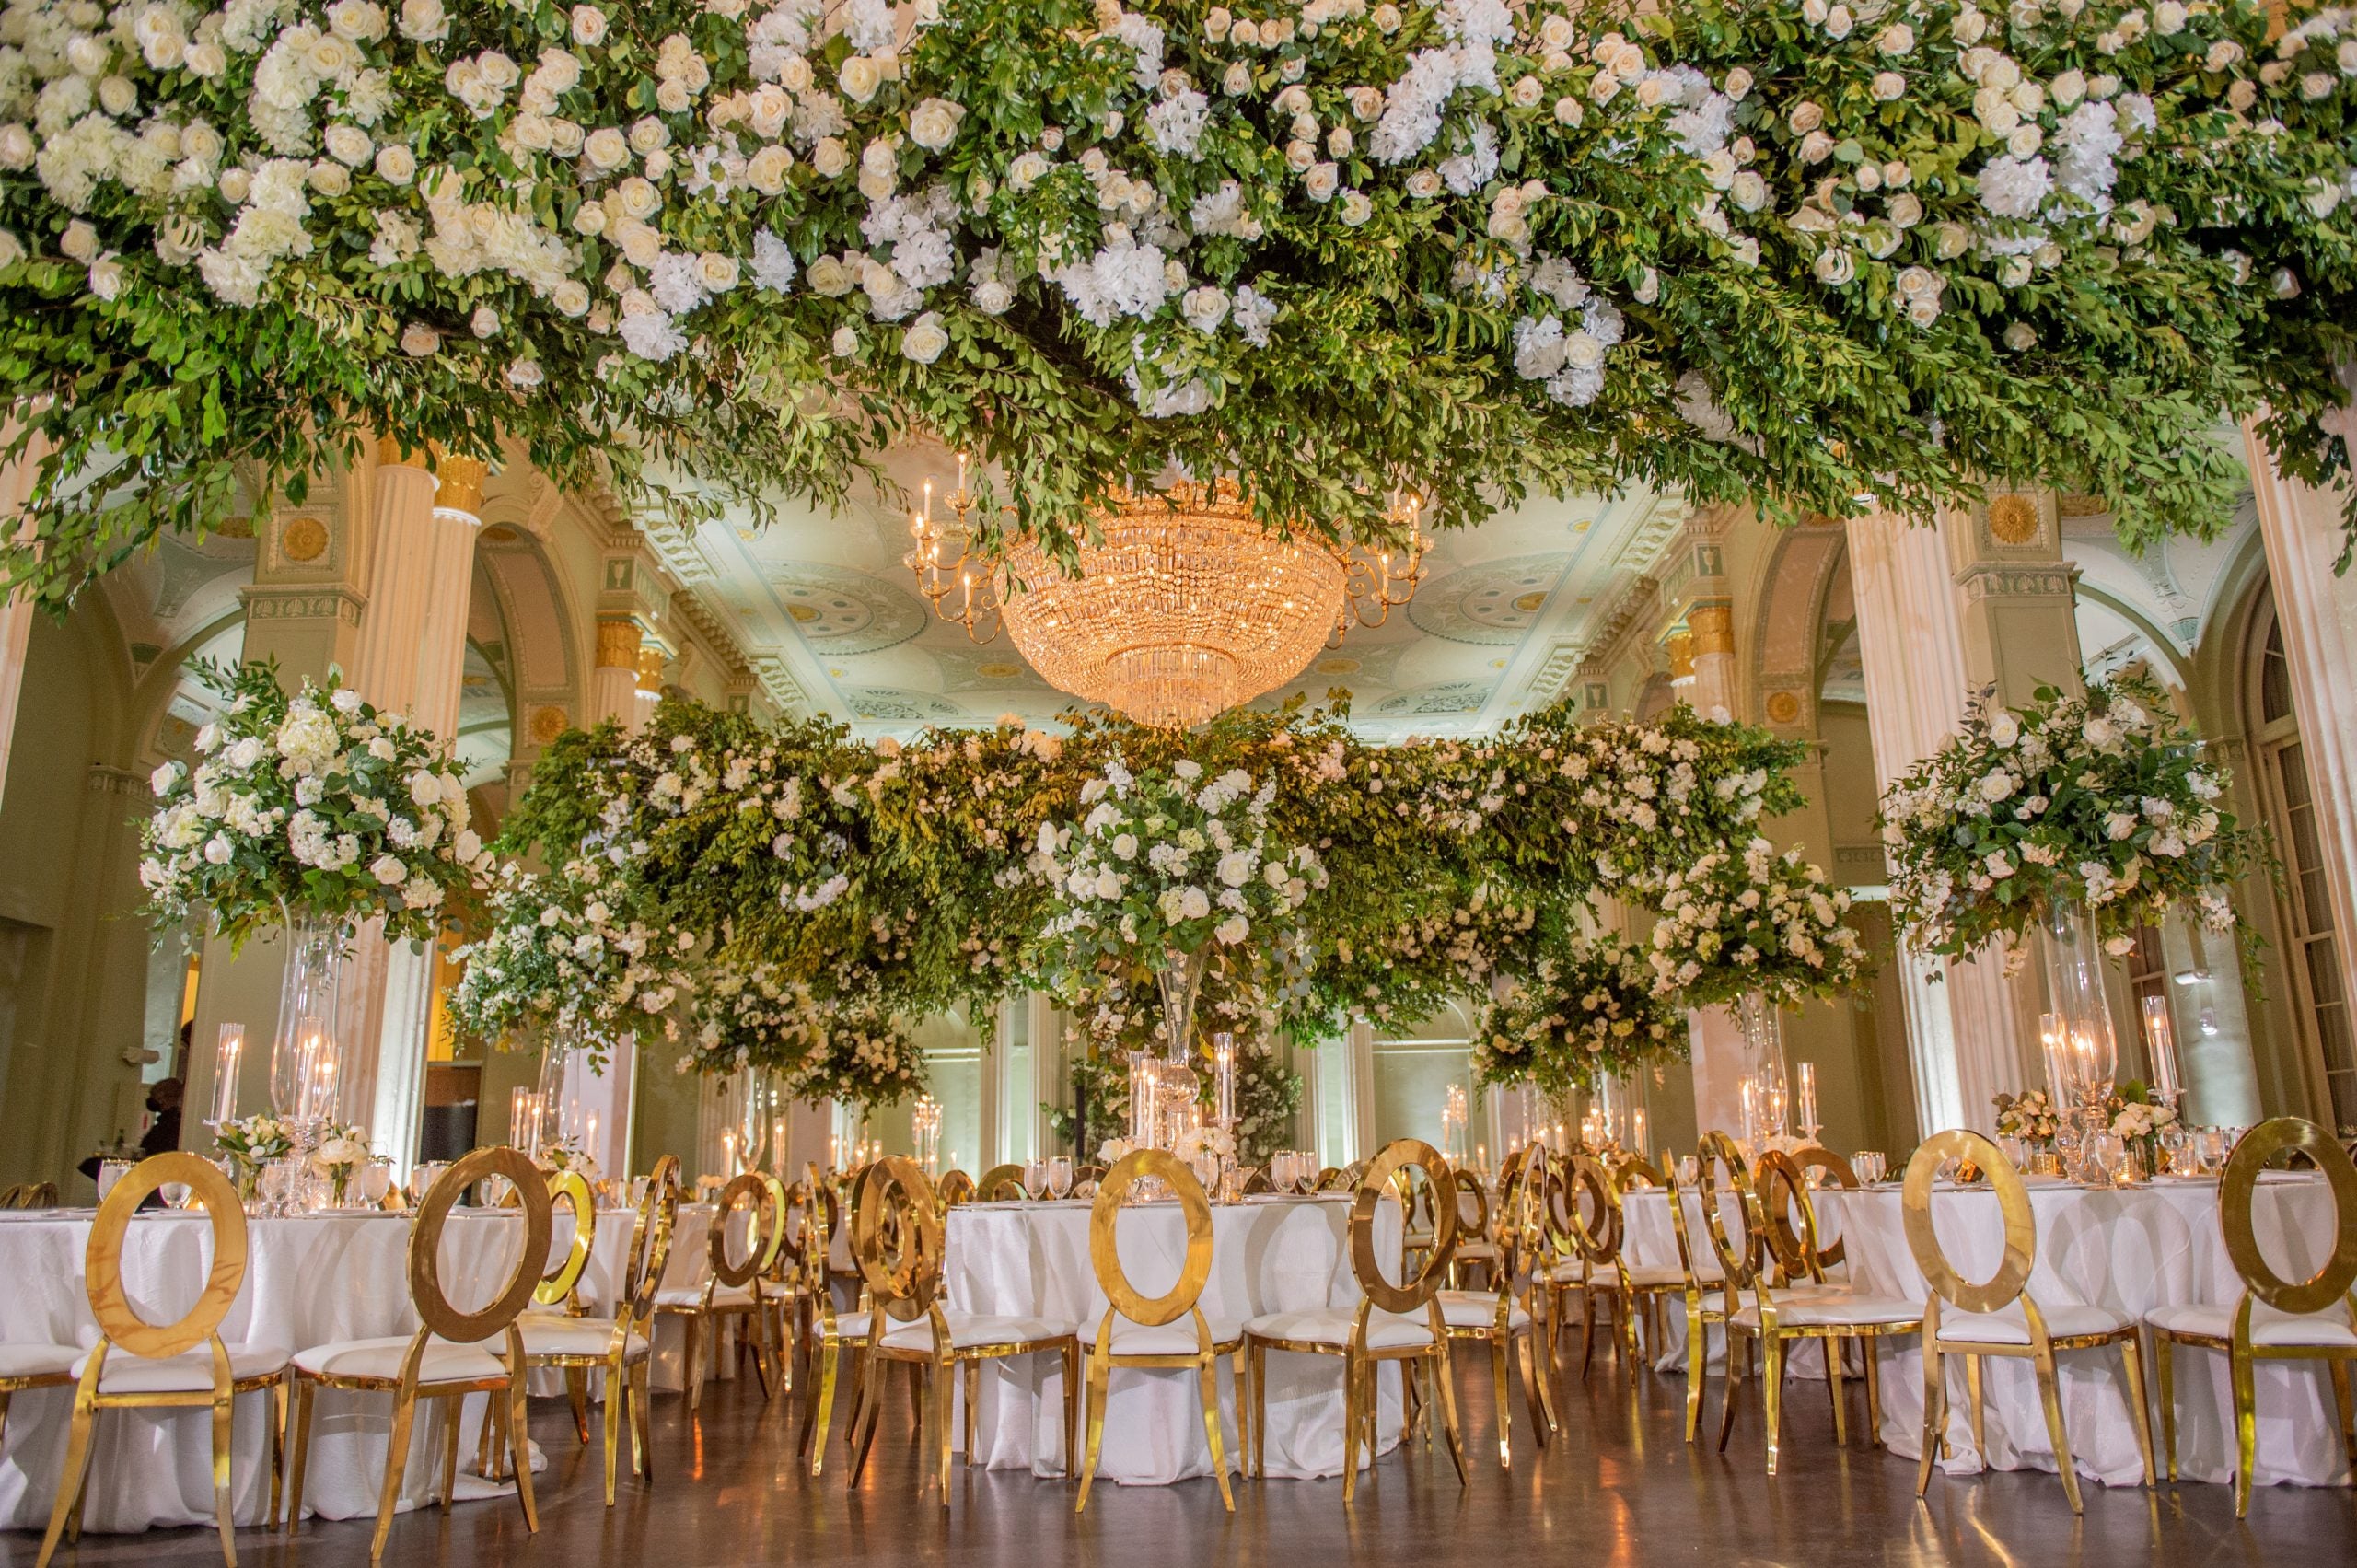 Bridal Bliss: Emani Hill And MLB Star Taylor Trammell Said “I Do” With Extravagant Florals And Fireworks